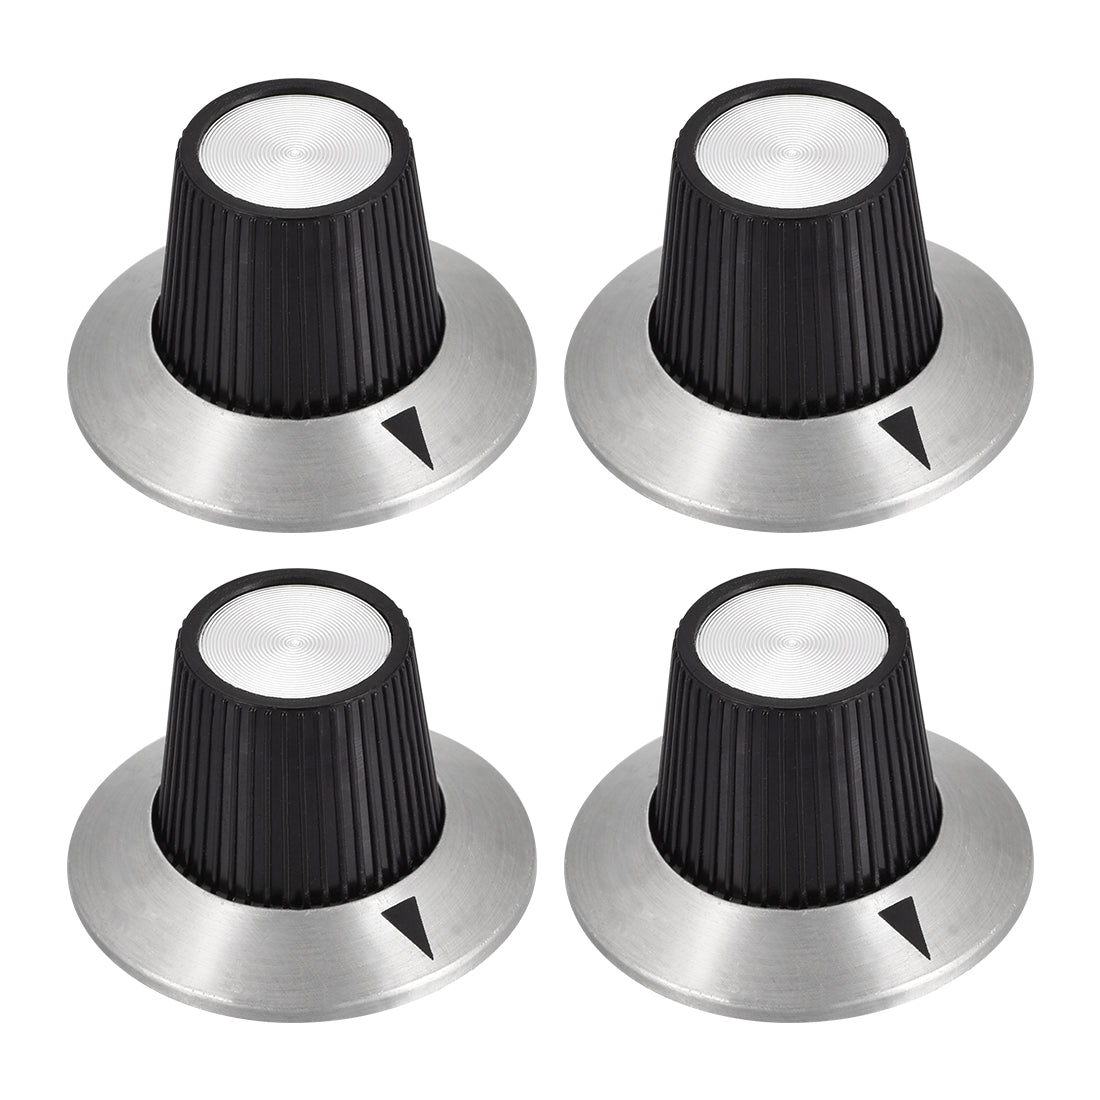 uxcell Uxcell 4pcs, 6mm Potentiometer Control Knobs For Electric Guitar Acrylic Volume Tone Knobs Black Silver Tone